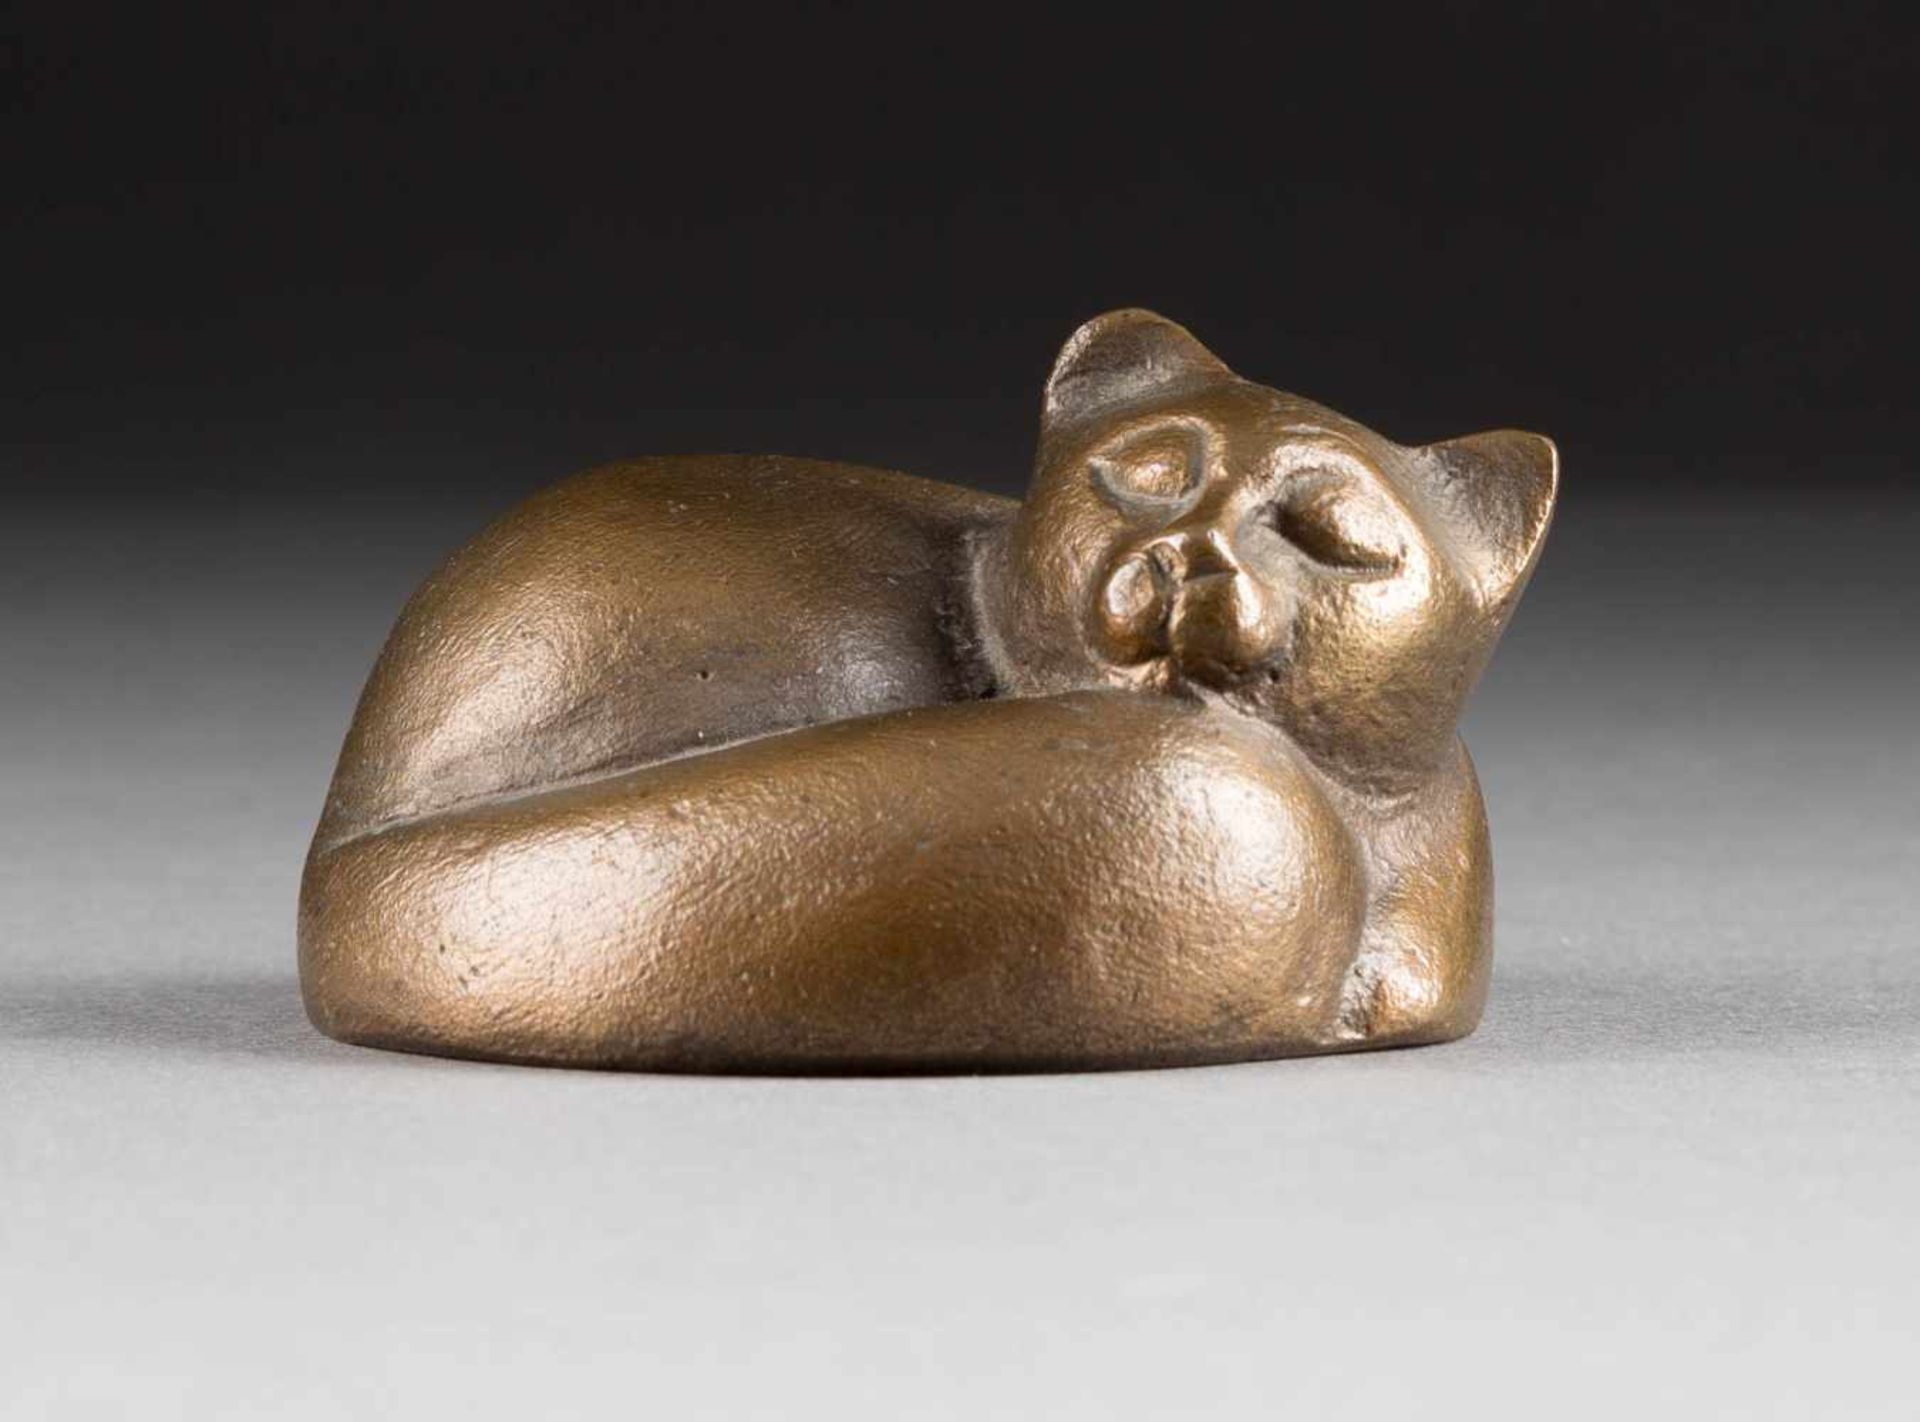 MONOGRAMMIST 'MF'Active in the 2nd half of the 20th century RESTING CAT Bronze, with bright